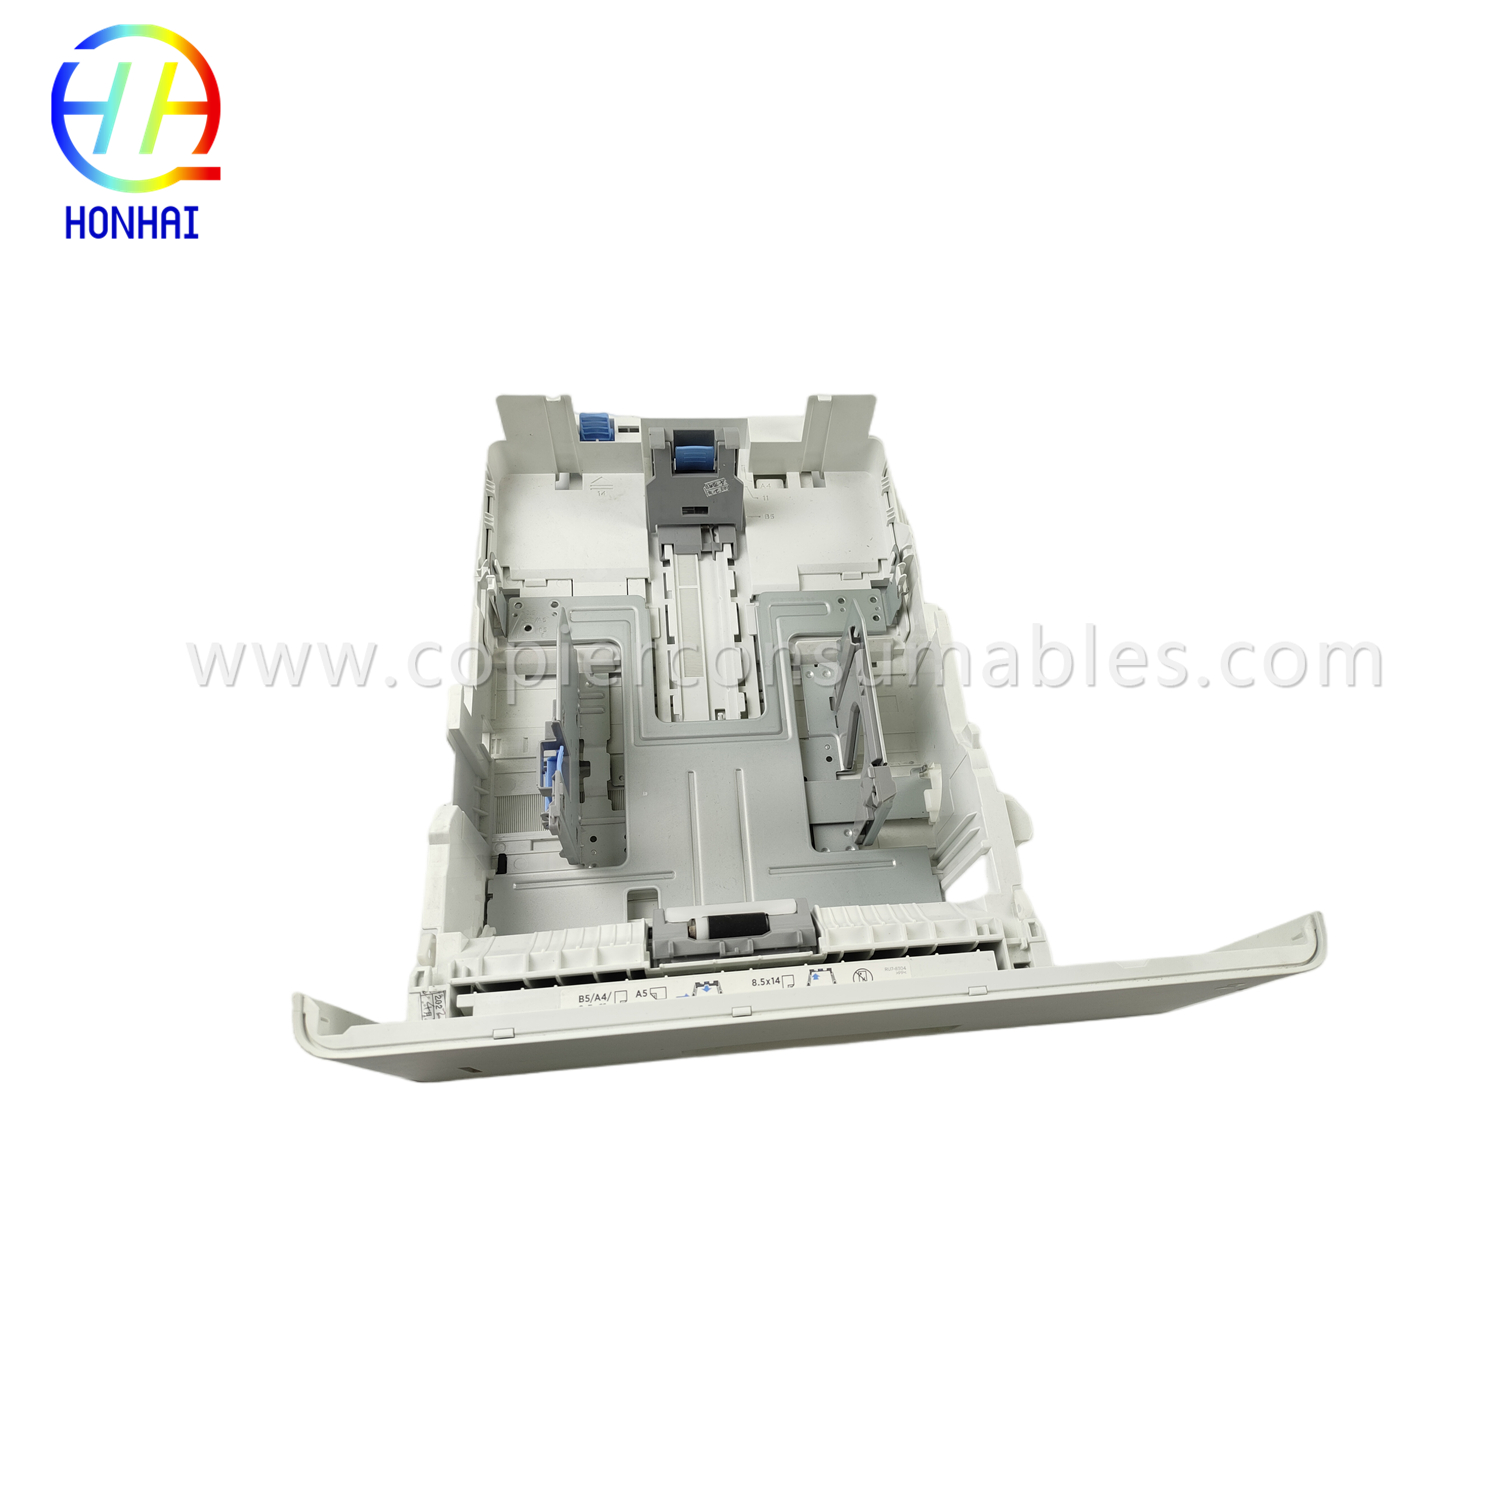 Paper assembly for HP M501 M527 M506  (3)